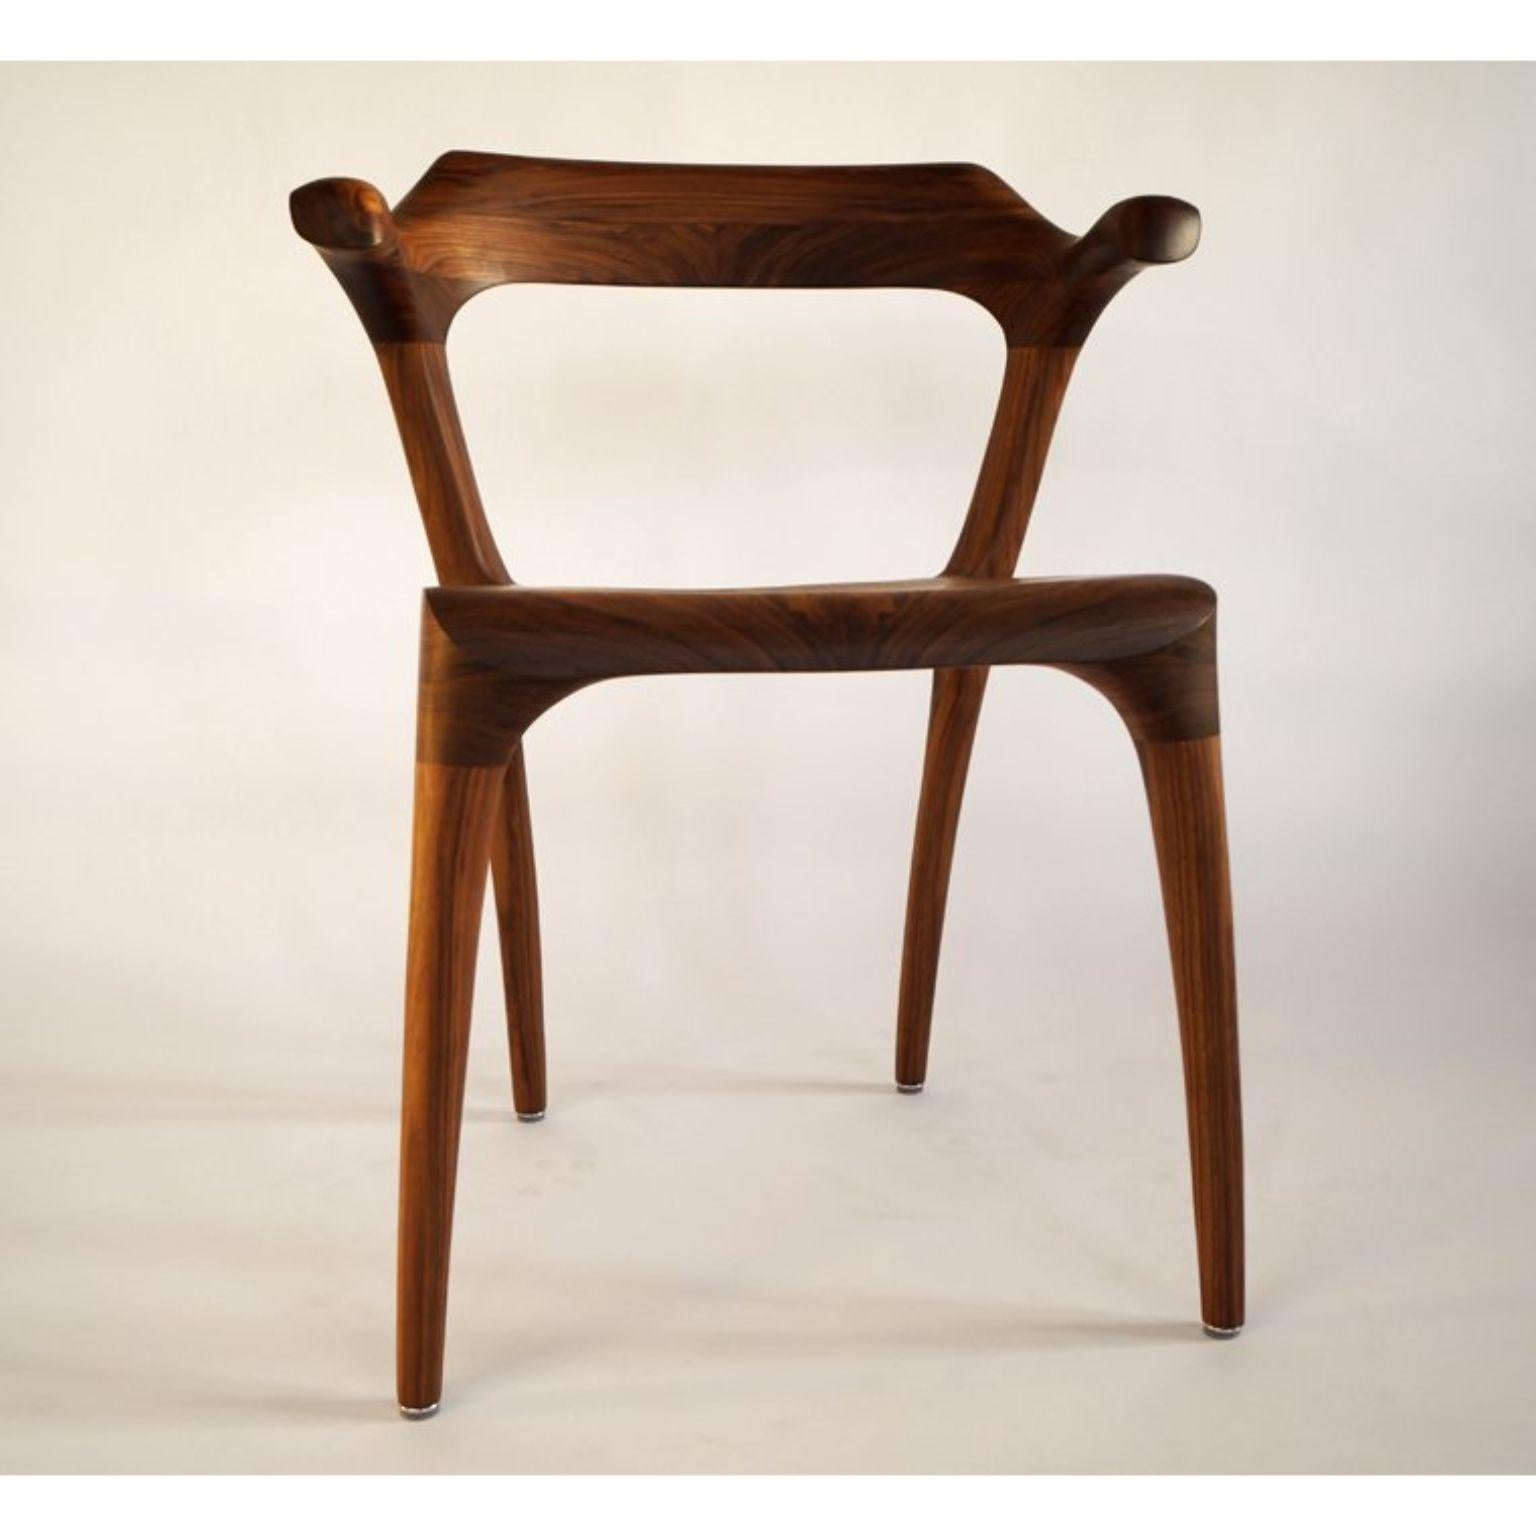 Flamingo Beak dining room chair handcrafted and designed by Morten Stenbaek
2015
Dated 
Signed and numbered
Dimensions: W 77 x D 53 x H 58 cm
 Seat 45.5 cm
Materials: Walnut, linseed oil finish

Flamingo has organic design with ergonomic